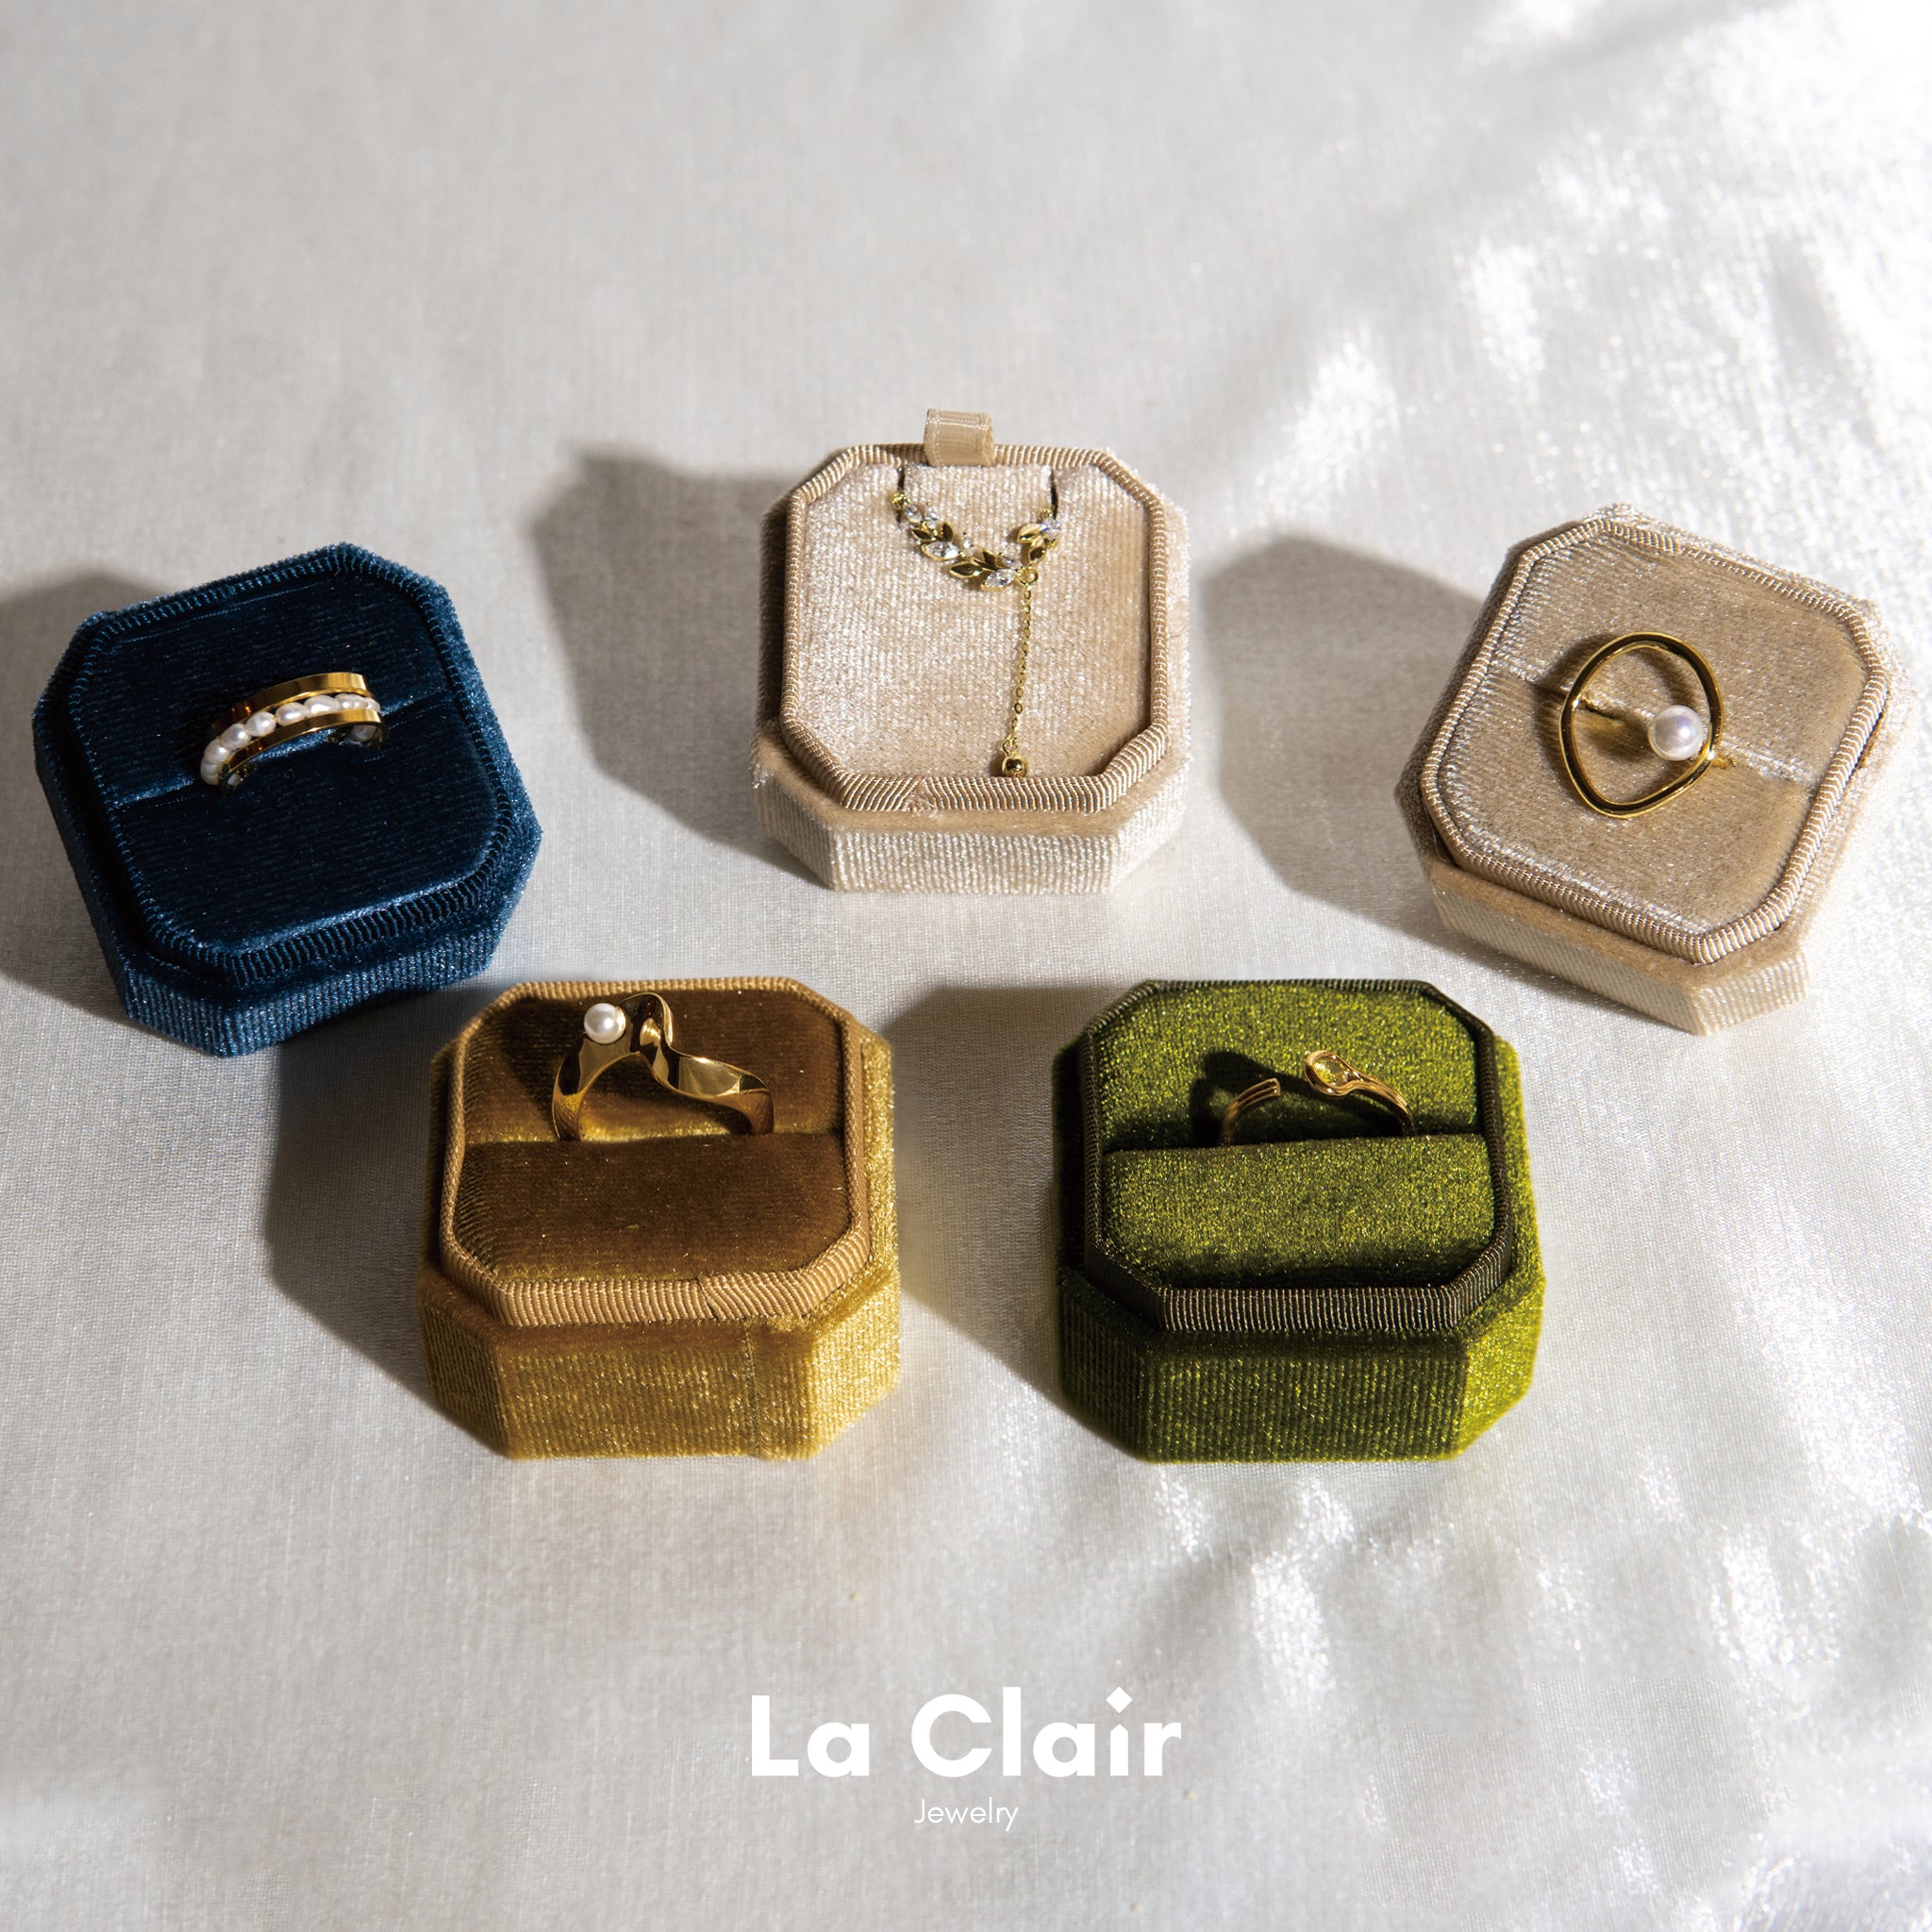 la clair jewelry blog picture_Jewelry Pairing Guide